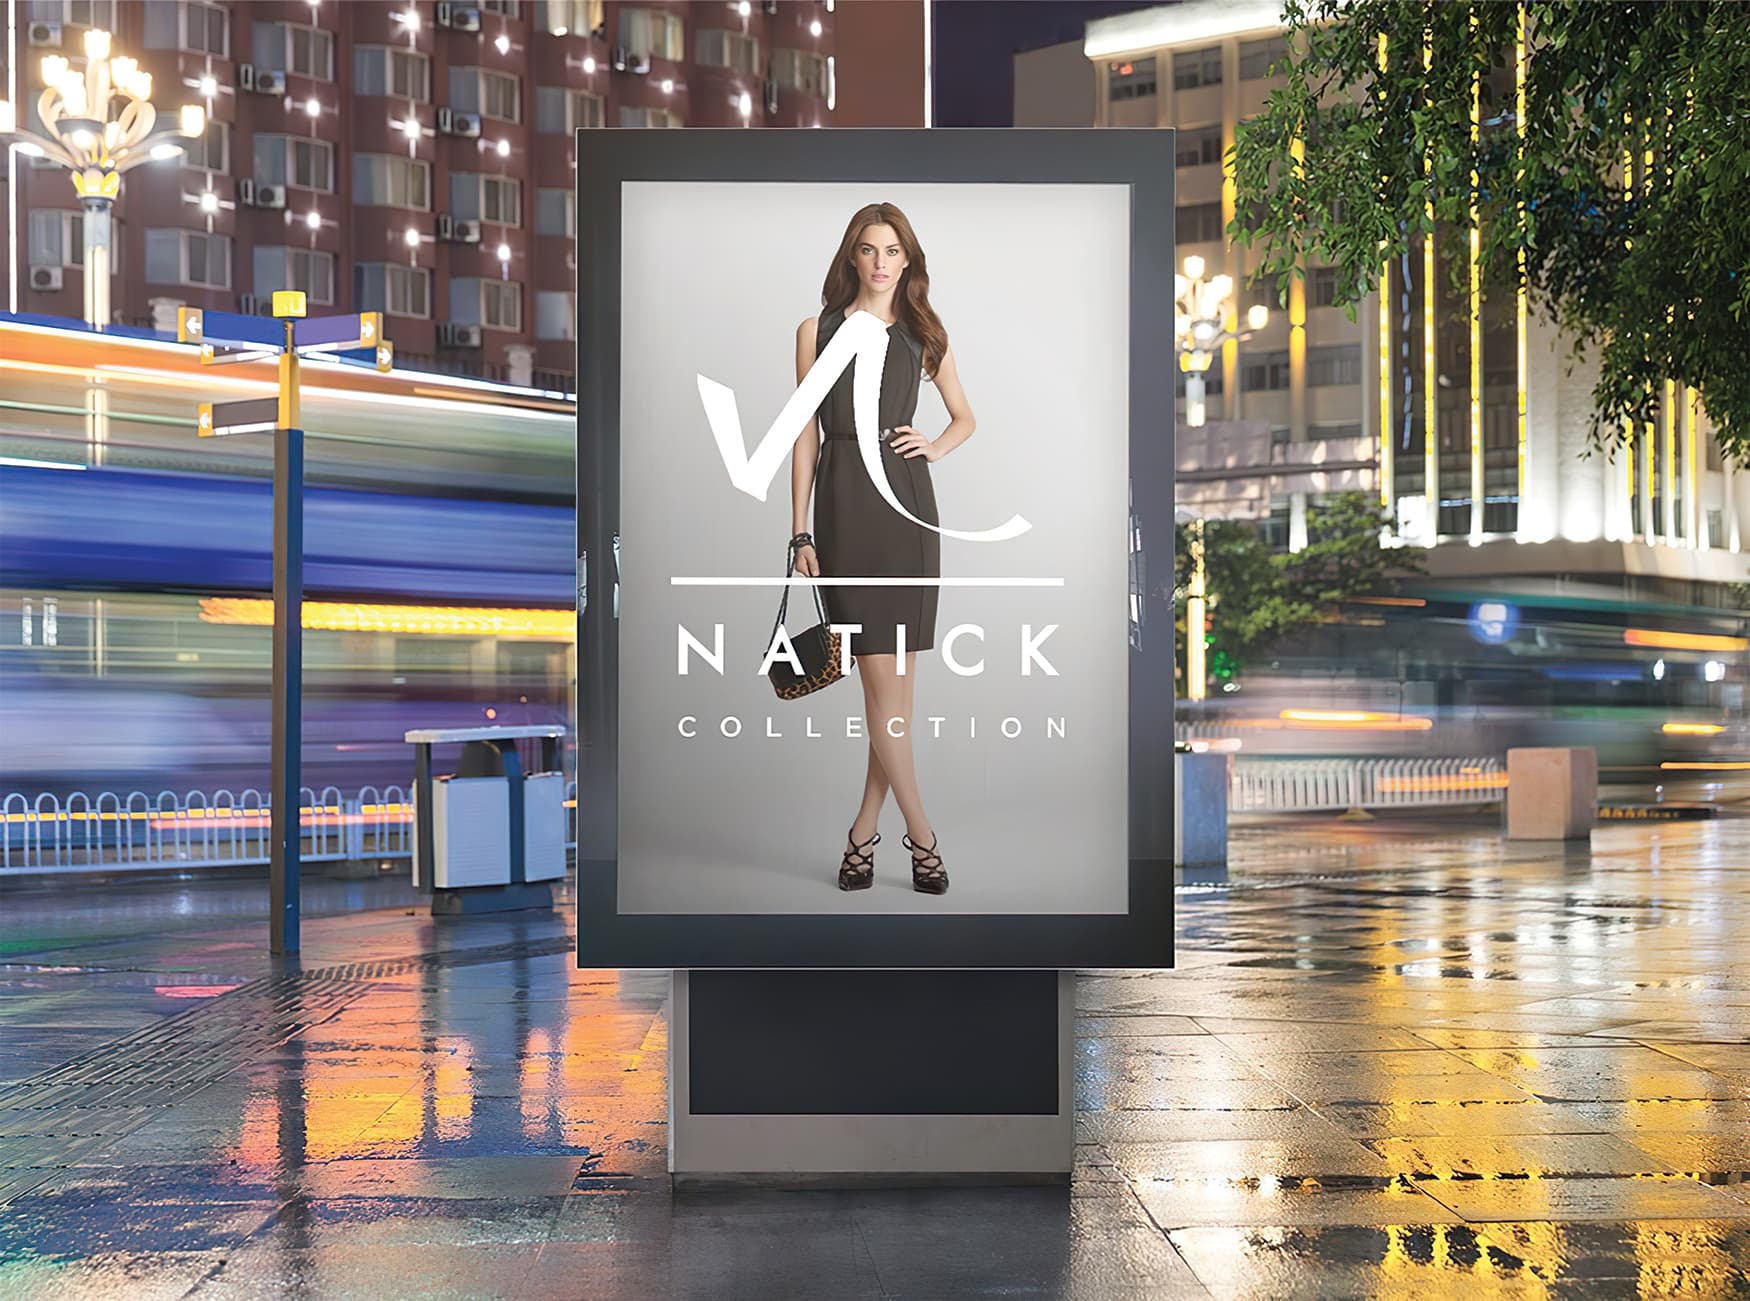 Natick Collection, New England's largest mixed-use retail destination, commissioned RSM Design to create a brand identity as well as a placemaking, identity, and wayfinding features. Branding and Visual Identity.